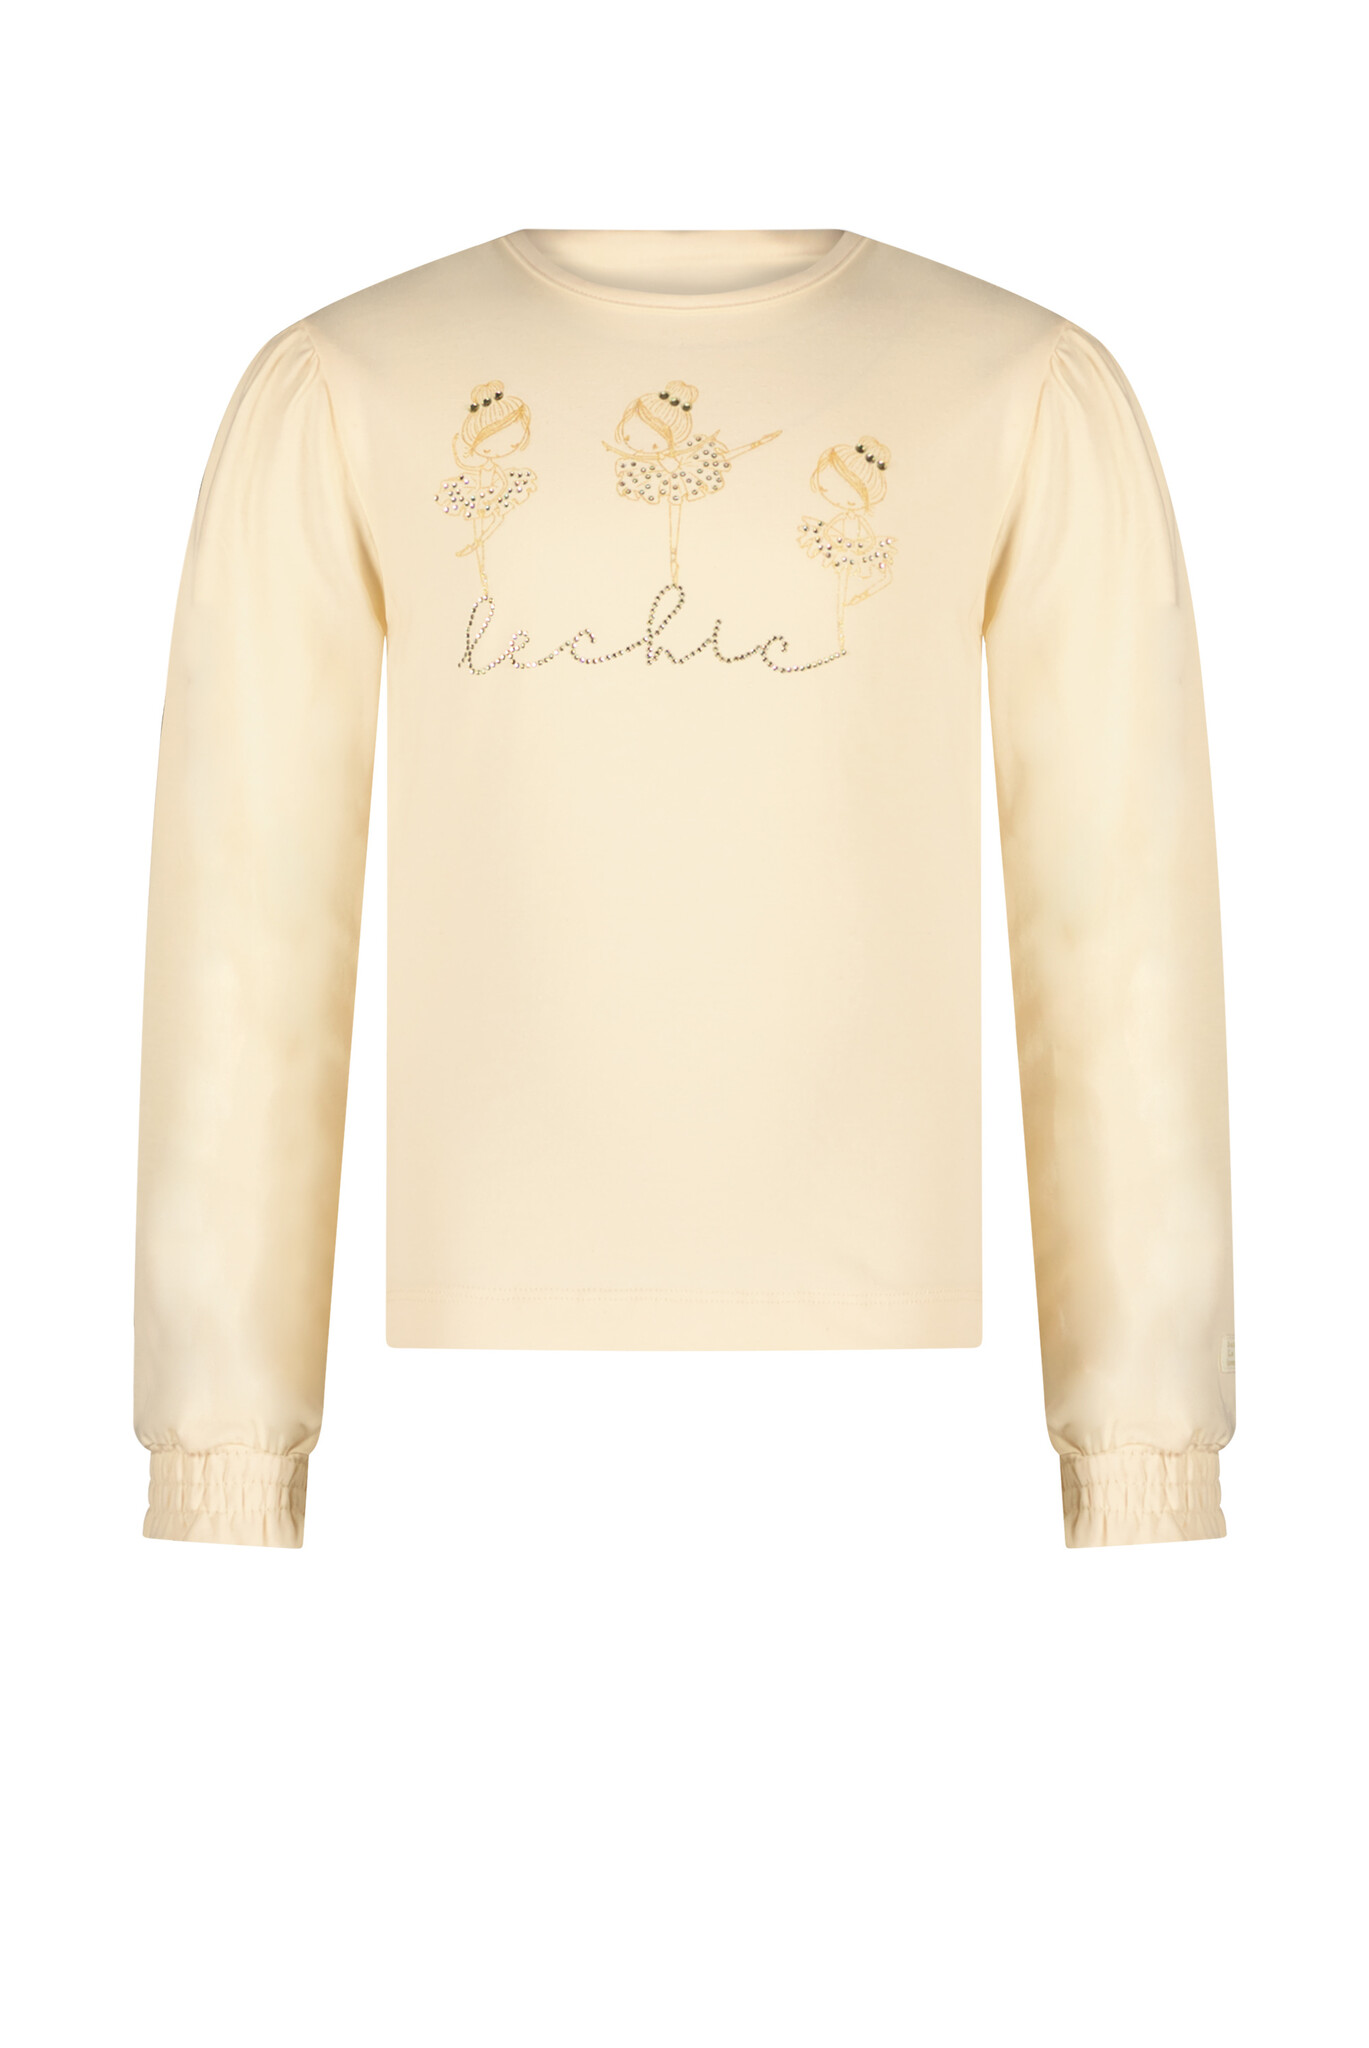 Le Chic Meisjes t-shirt dancing - Nora - Pearled ivory